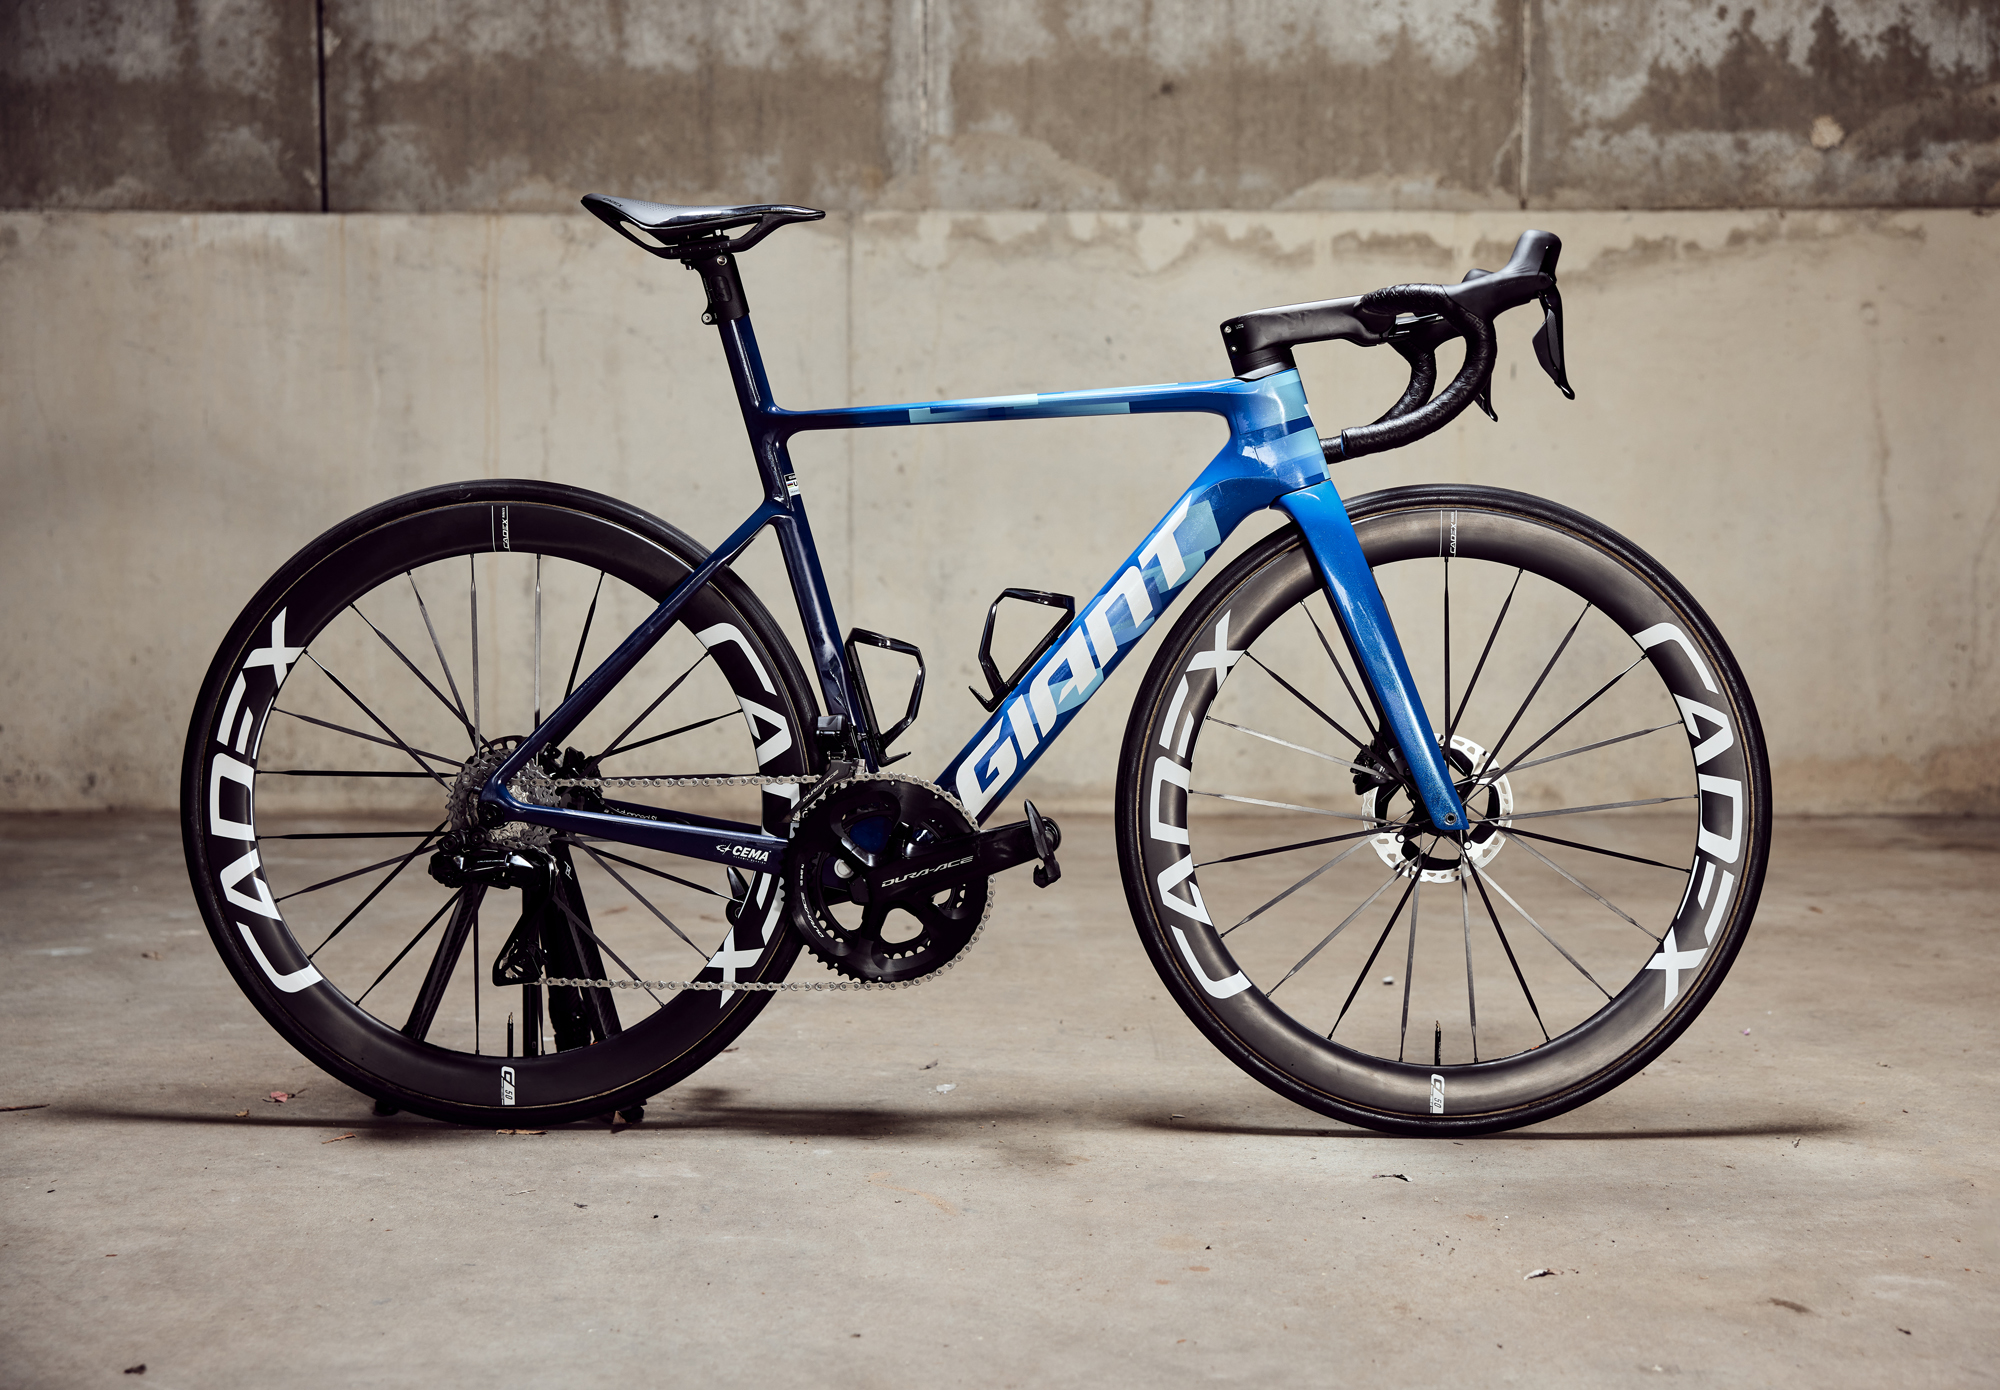 The new Giant Propel is an aero bike to challenge the UCI weight limit